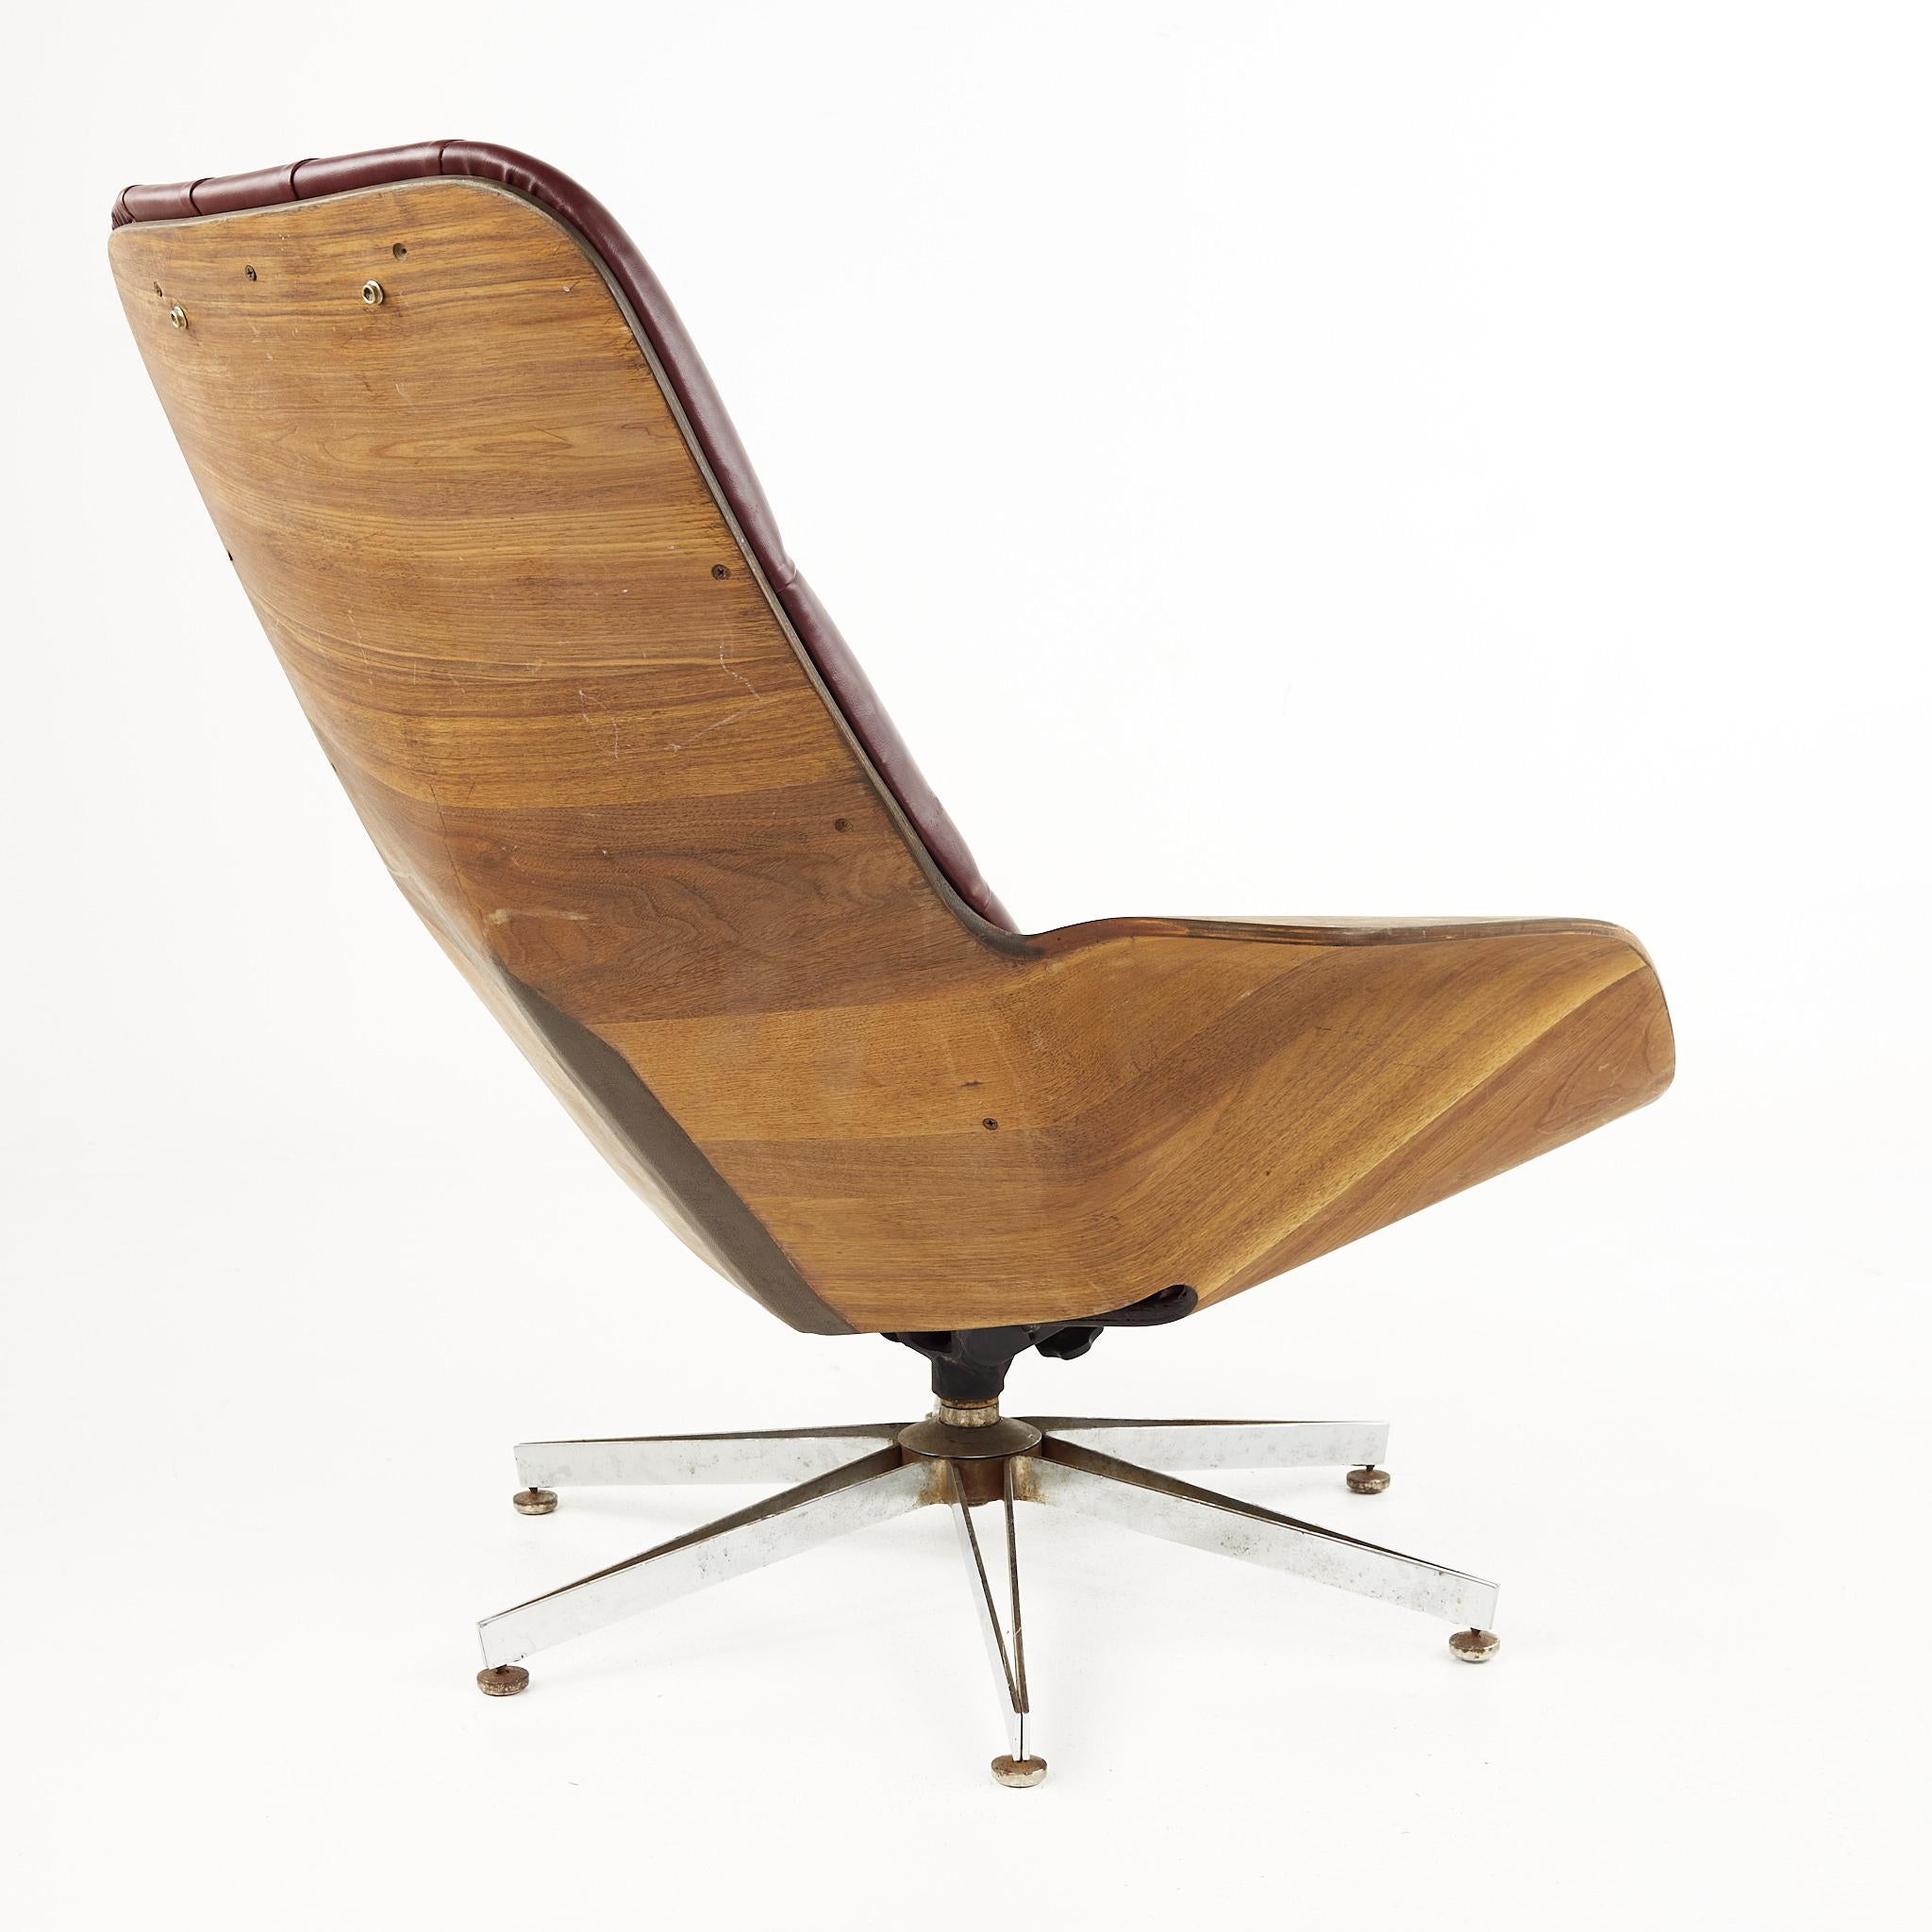 Late 20th Century George Mulhauser for Plycraft Mid Century Tufted Walnut Lounge Chair